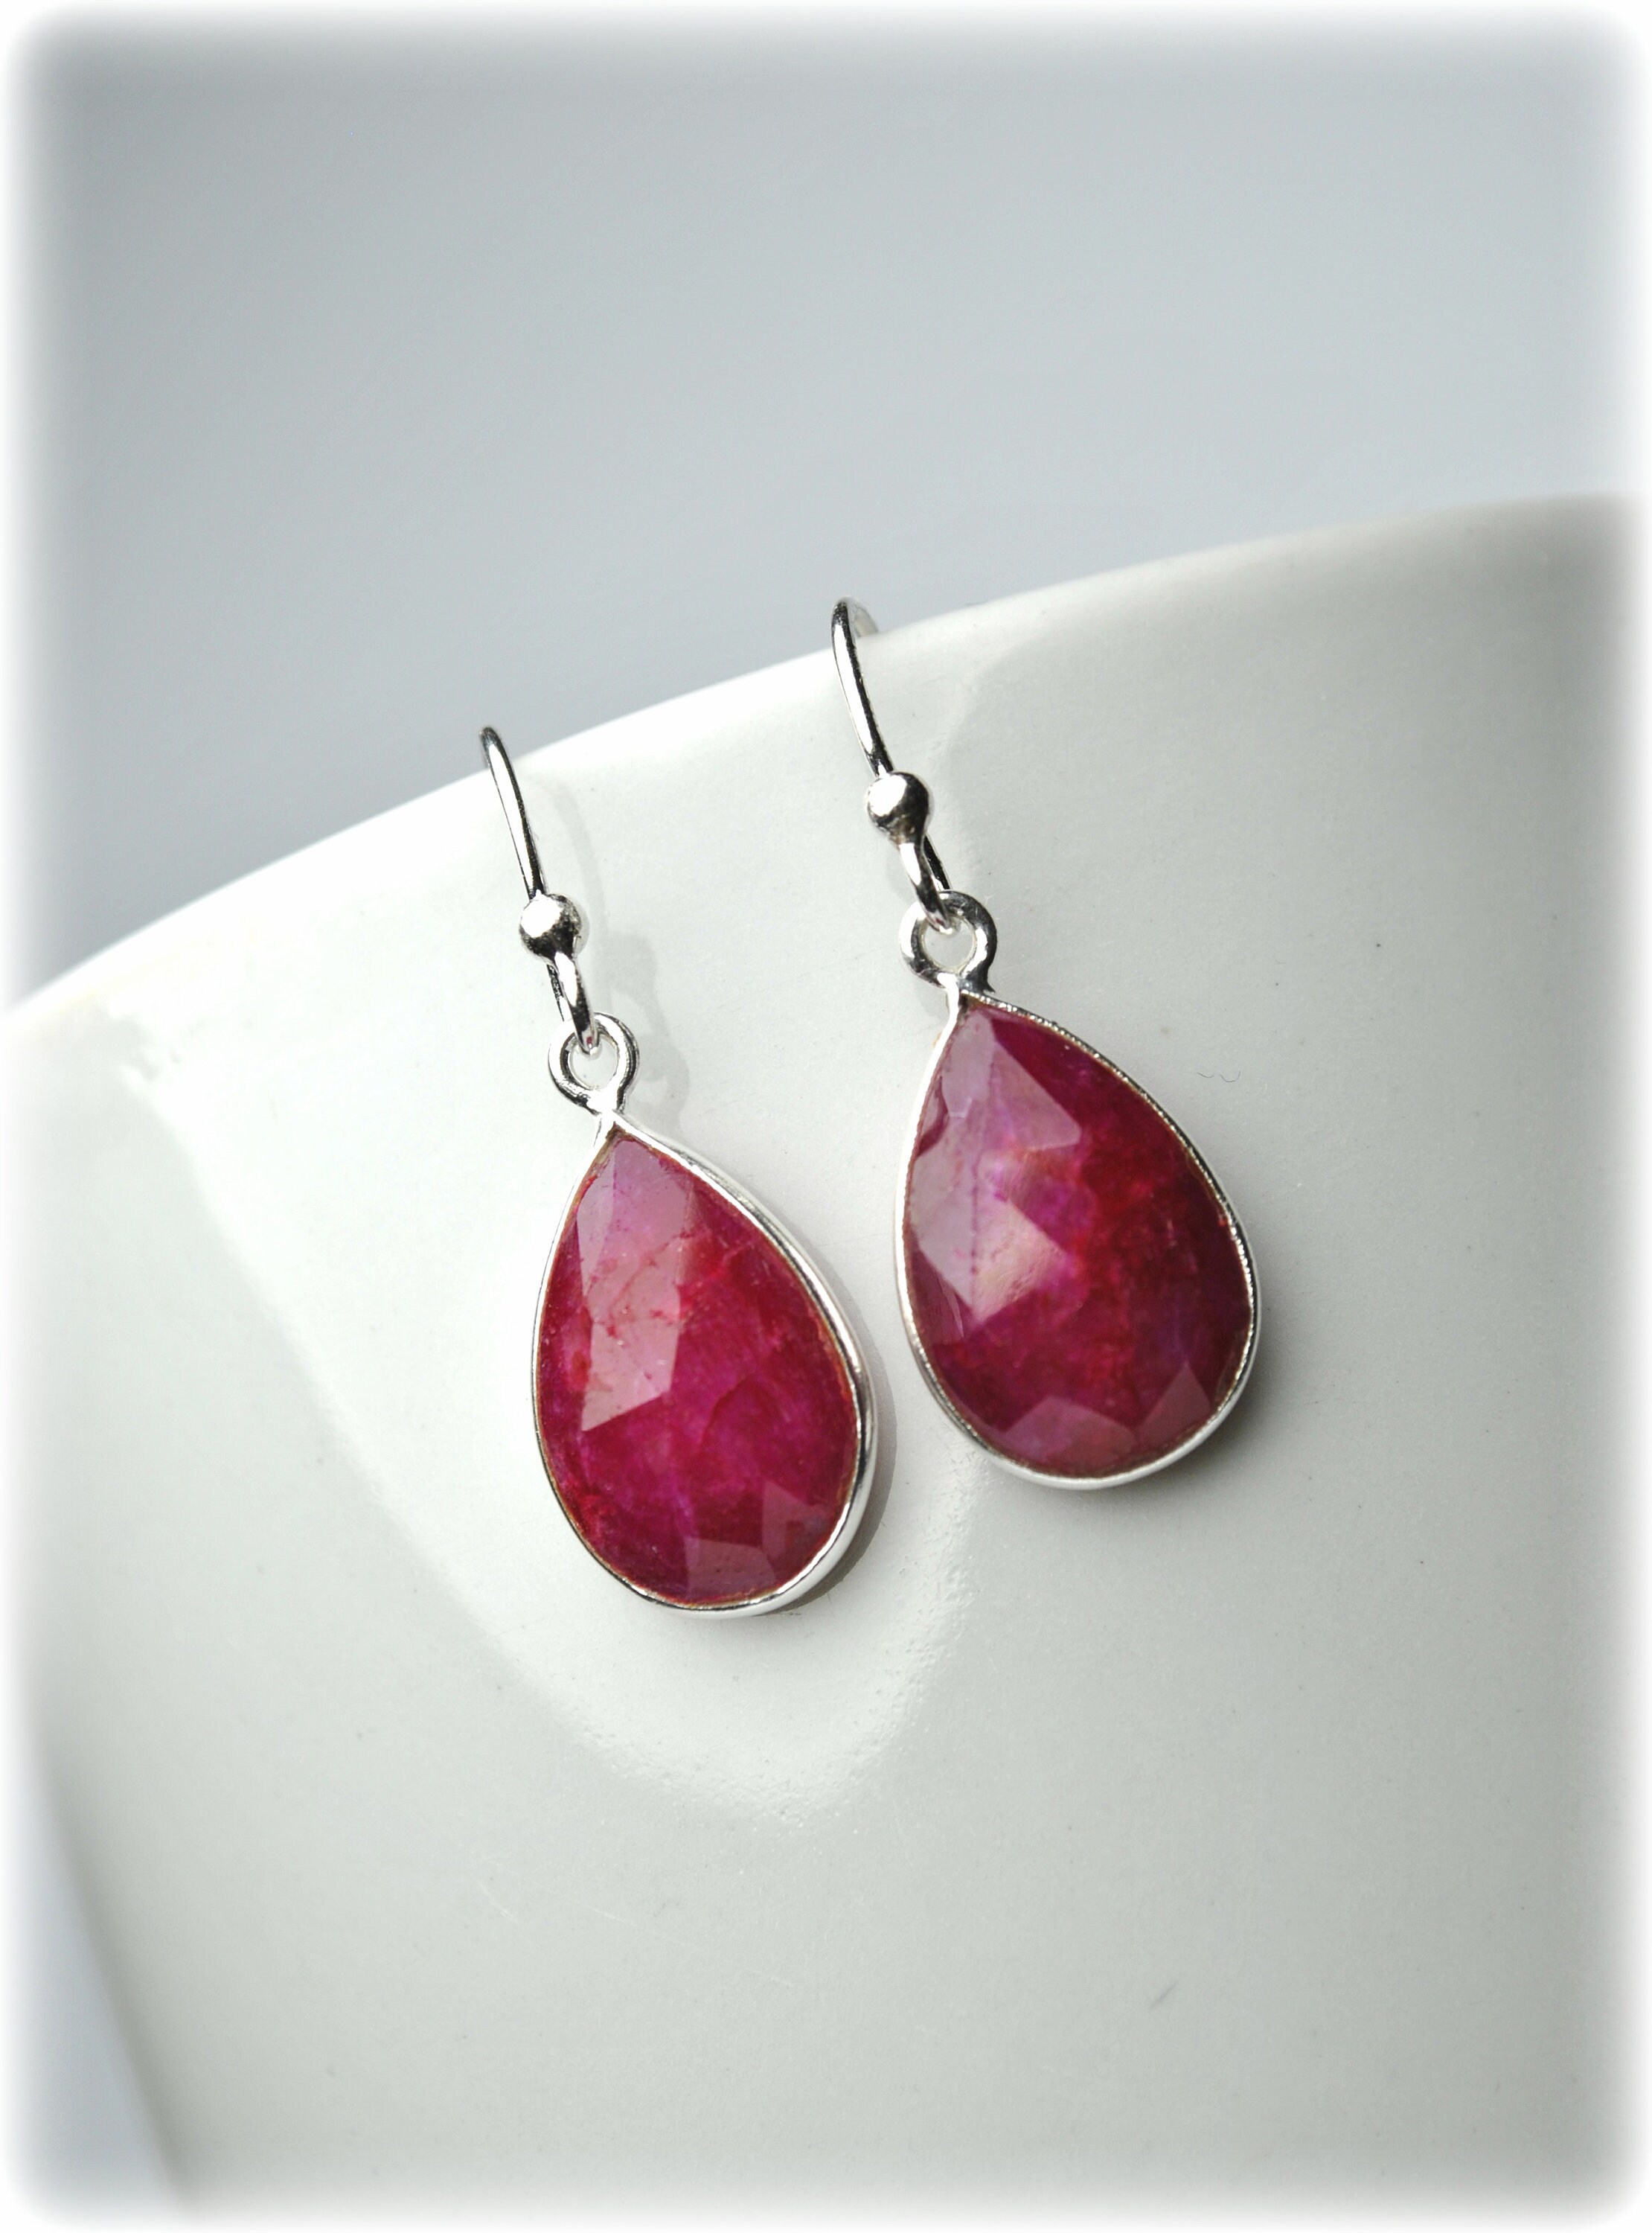 RED LAB RUBY ANTIQUE ART DECO DESIGN 925 STERLING SILVER EARRINGS #435 